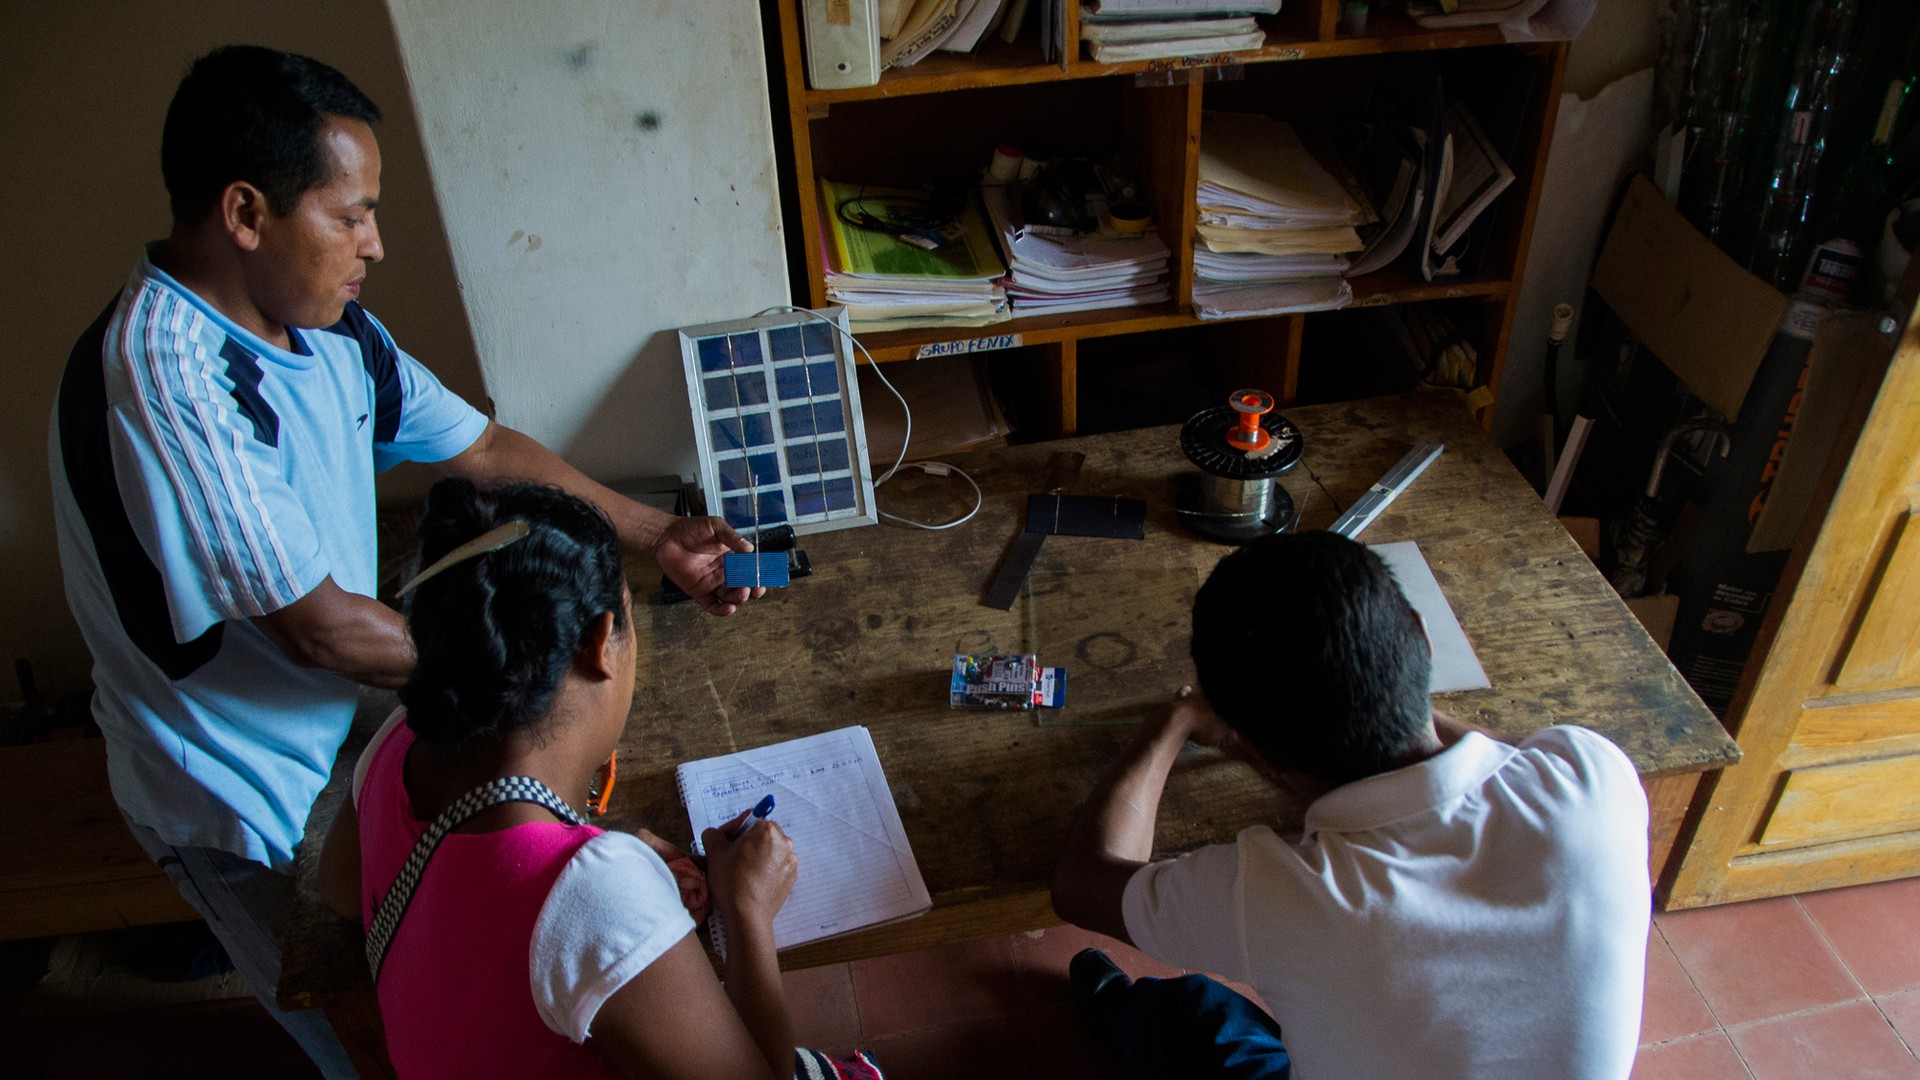 Jorge David López teaches two Grupo Fénix interns, Melvin Antonio Gonzalez and Erlinda deJesus Arroliga, how to build small solar panels for a group of students that will be visiting Sabana Grande, Nicaragua. Grupo Fénix trains international students and interns from the community to build and install solar panels on homes in the area that do not have electricity. (Photo by Danika Worthington)